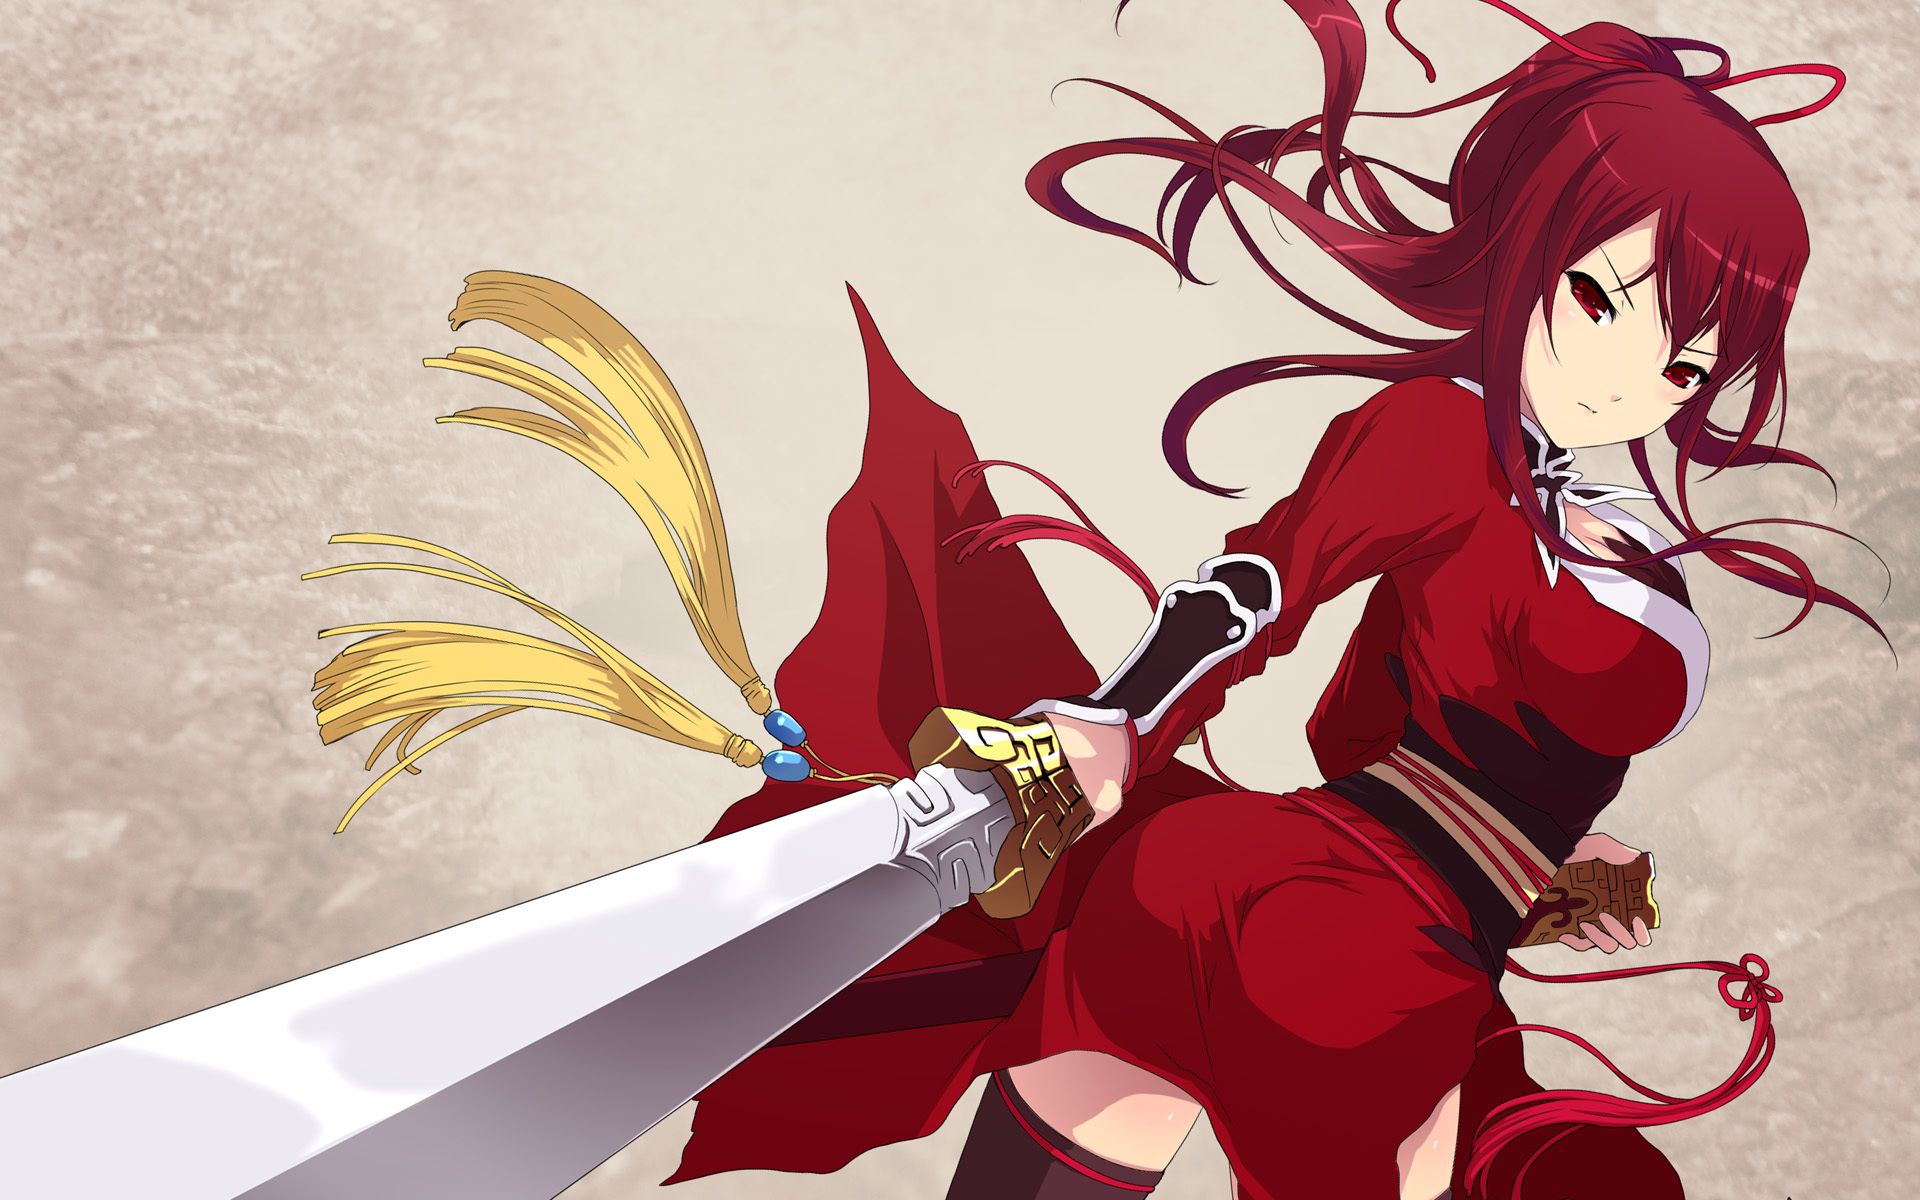 Anime Red Haired Girl with Sword